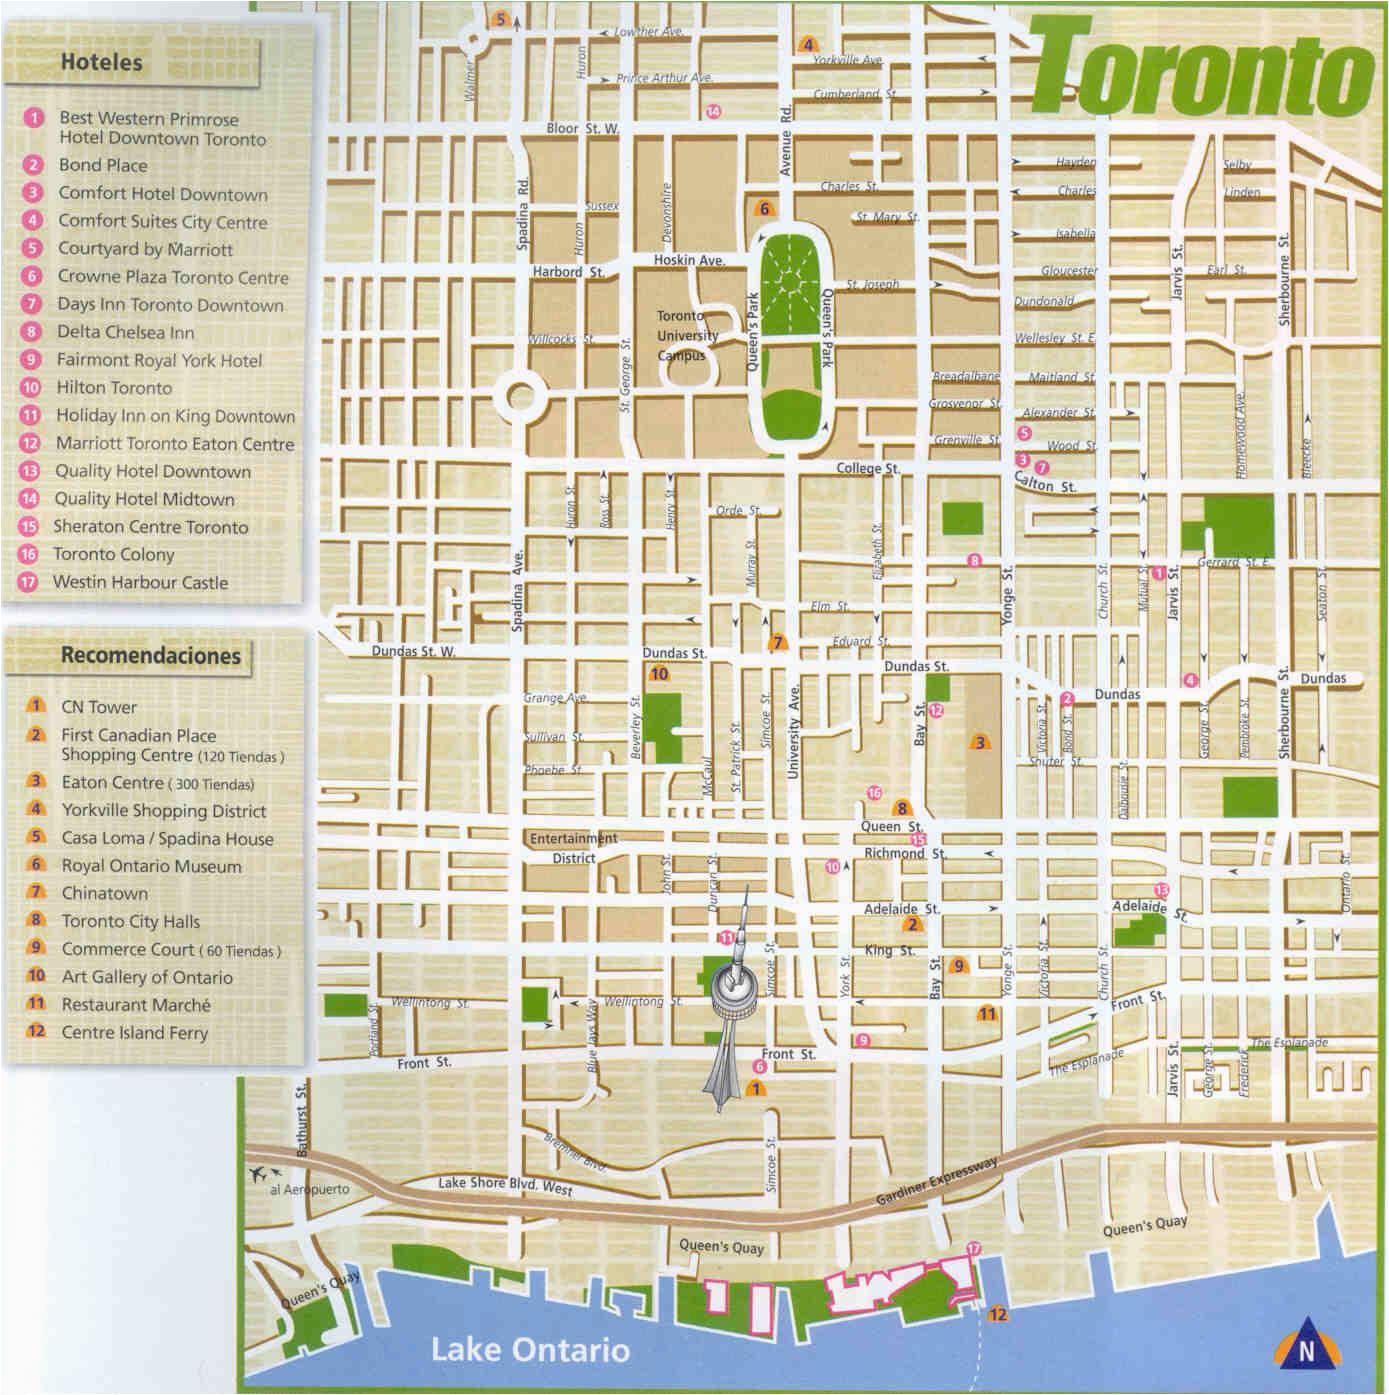 downtown toronto hotels map 2018 world s best hotels